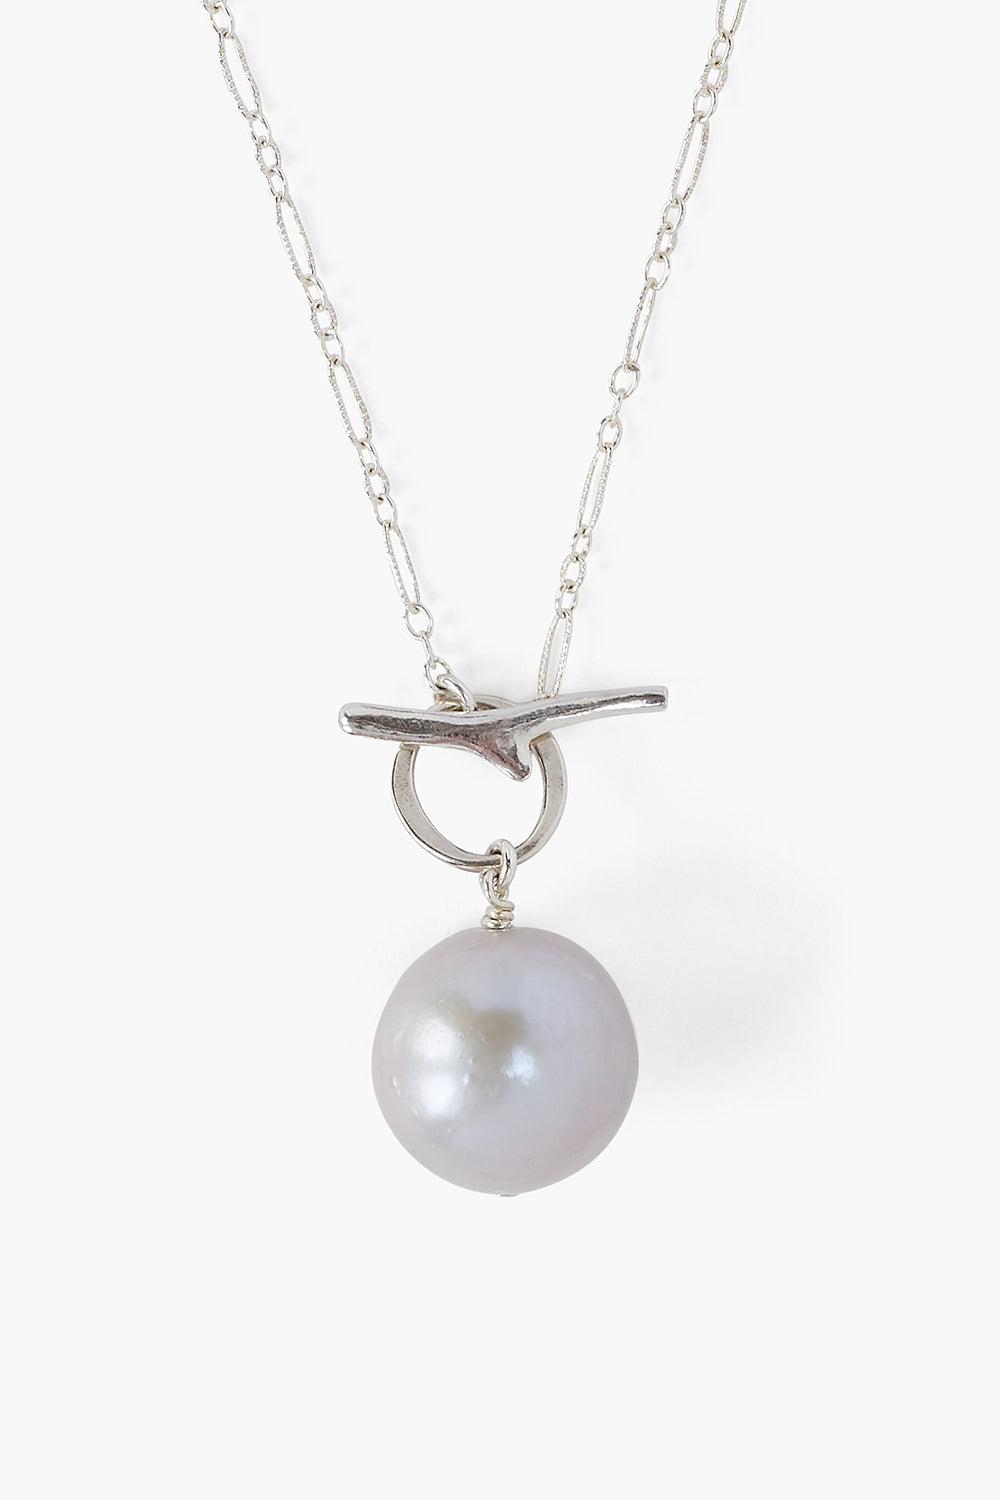 FRESHWATER PEARL NECKLACE-GREY PEARL - Kingfisher Road - Online Boutique